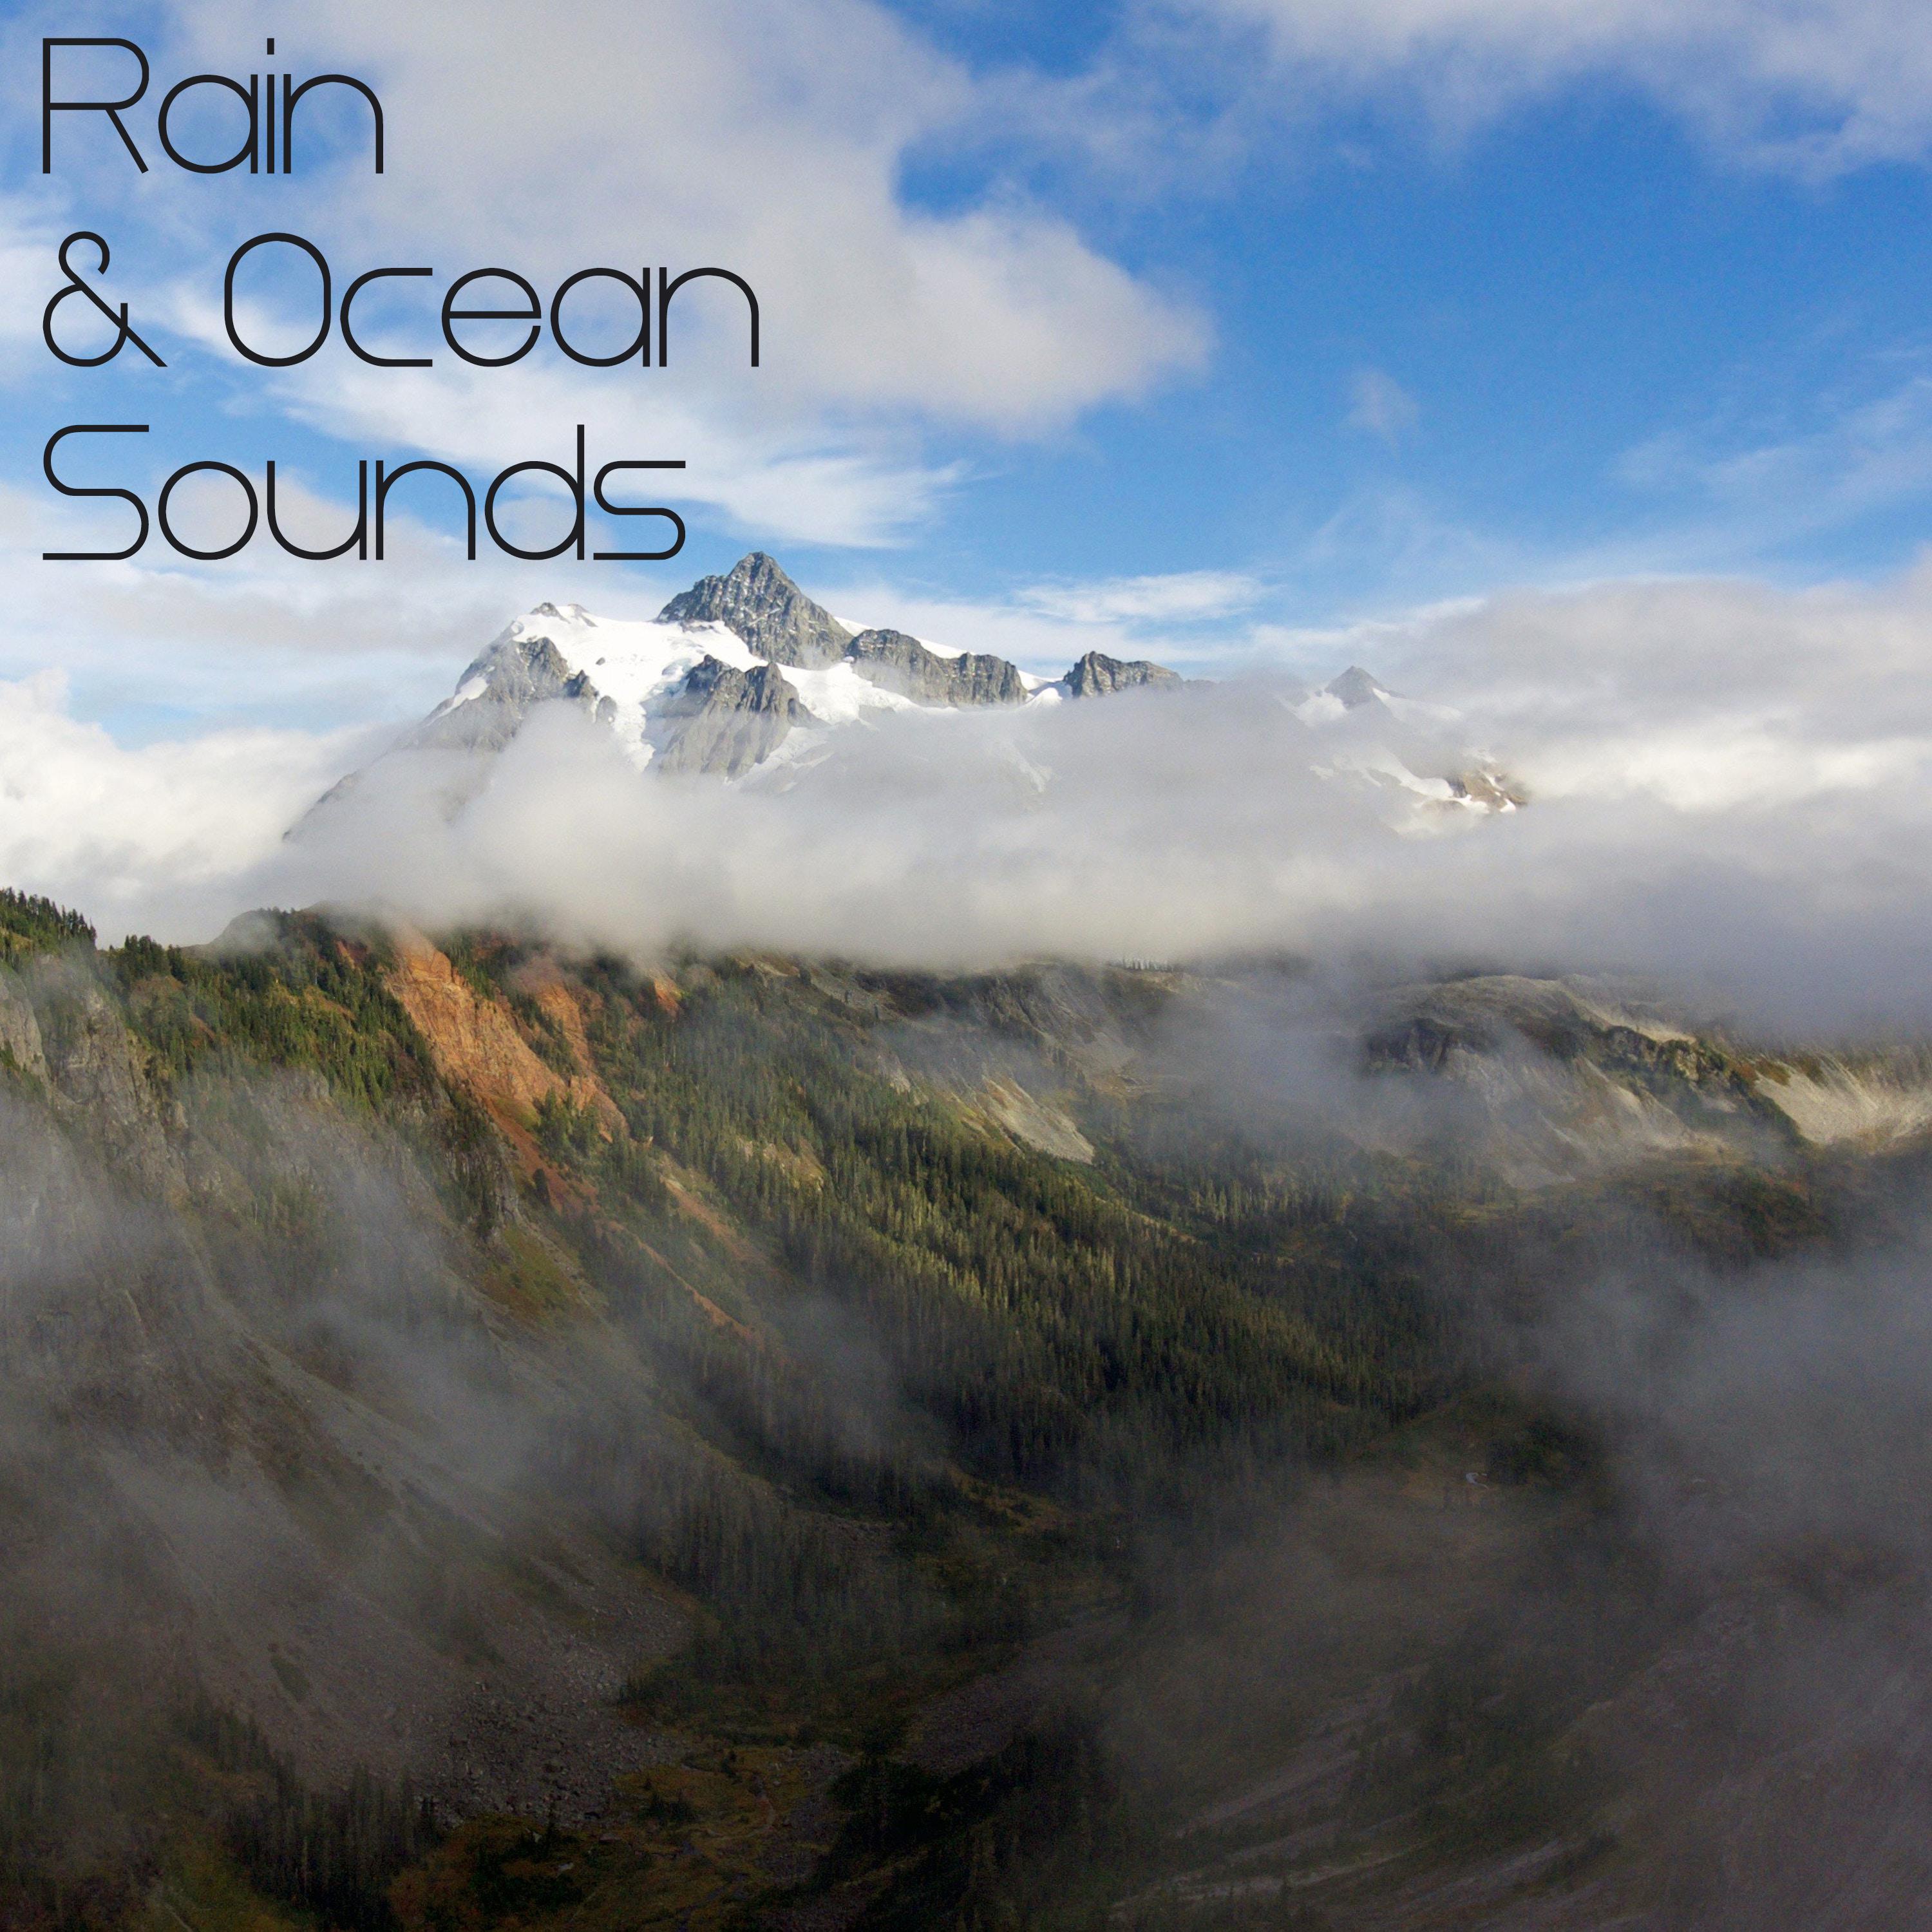 15 Tracks of Rain and Ocean Sounds. Loopable with No Fades